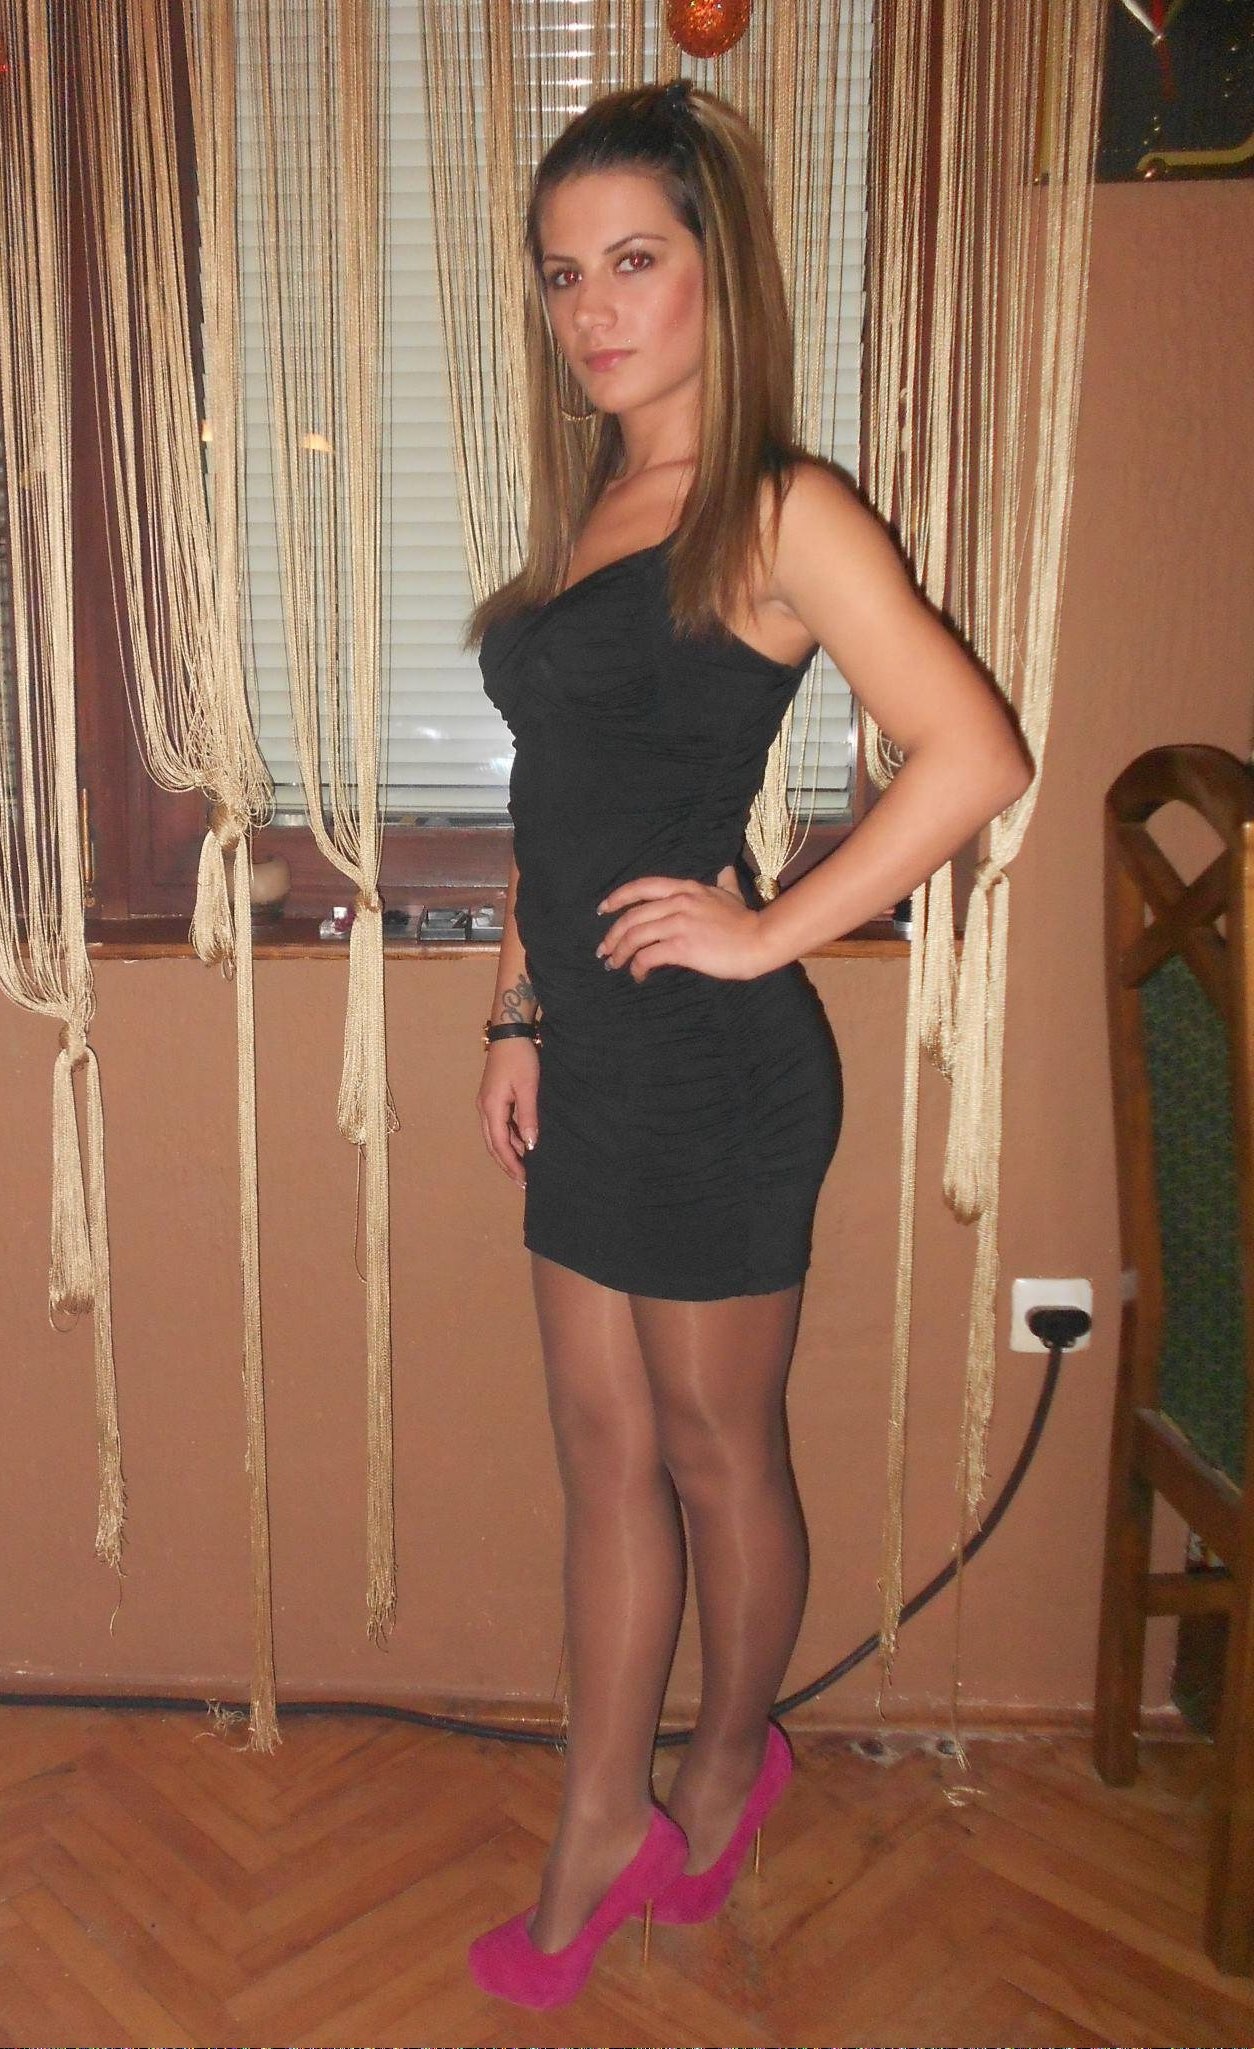 Another amateur pics of girls in tight dresses picture